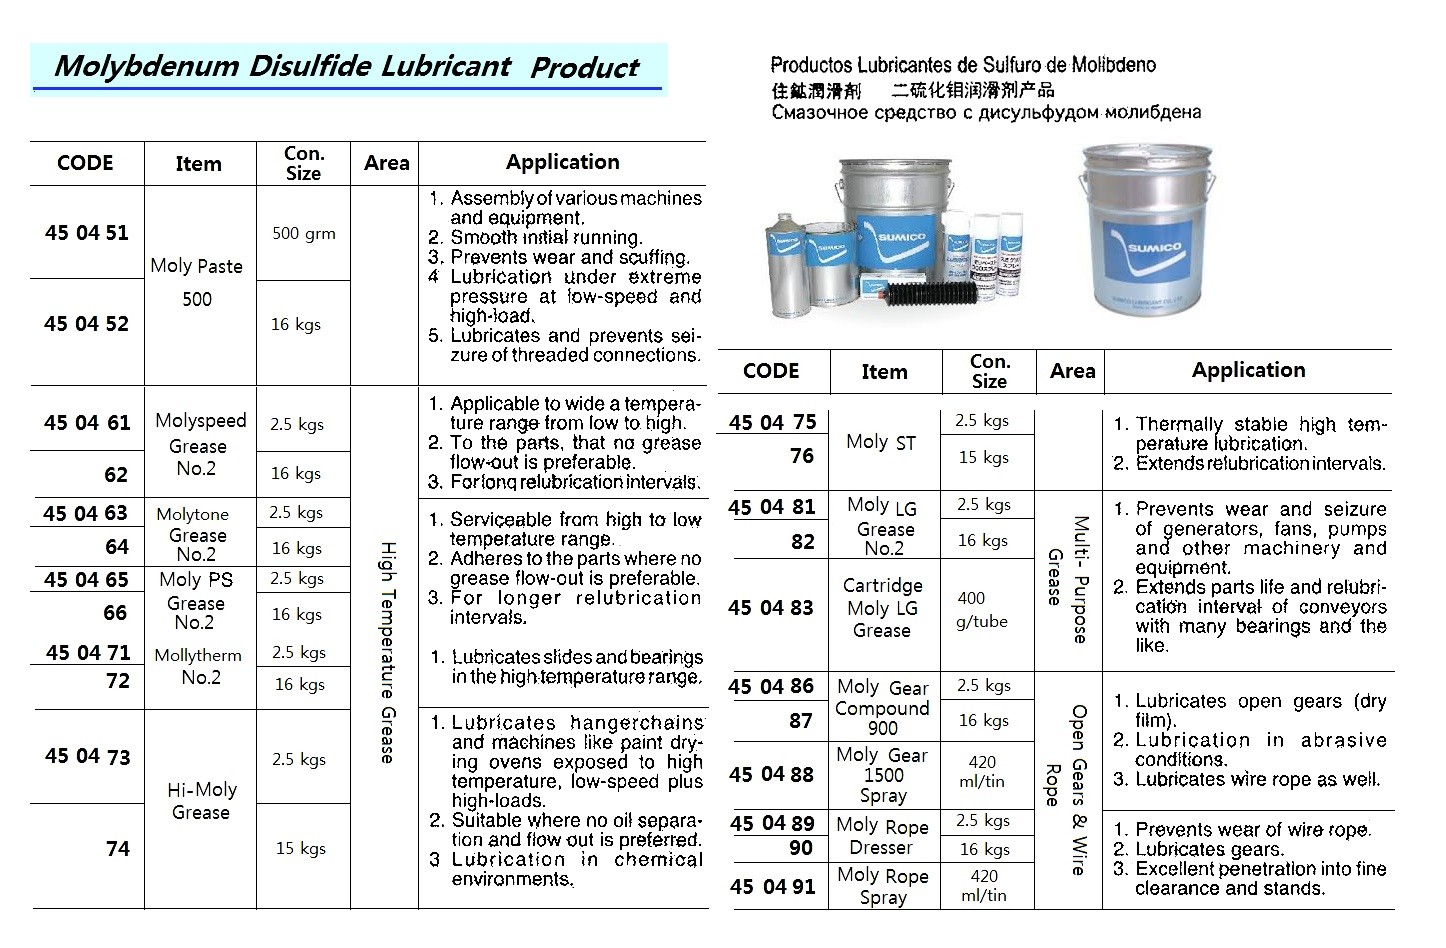 450451-450491 MOLYBDENUM DISULFIDE LUBRICANT PRODUCTS